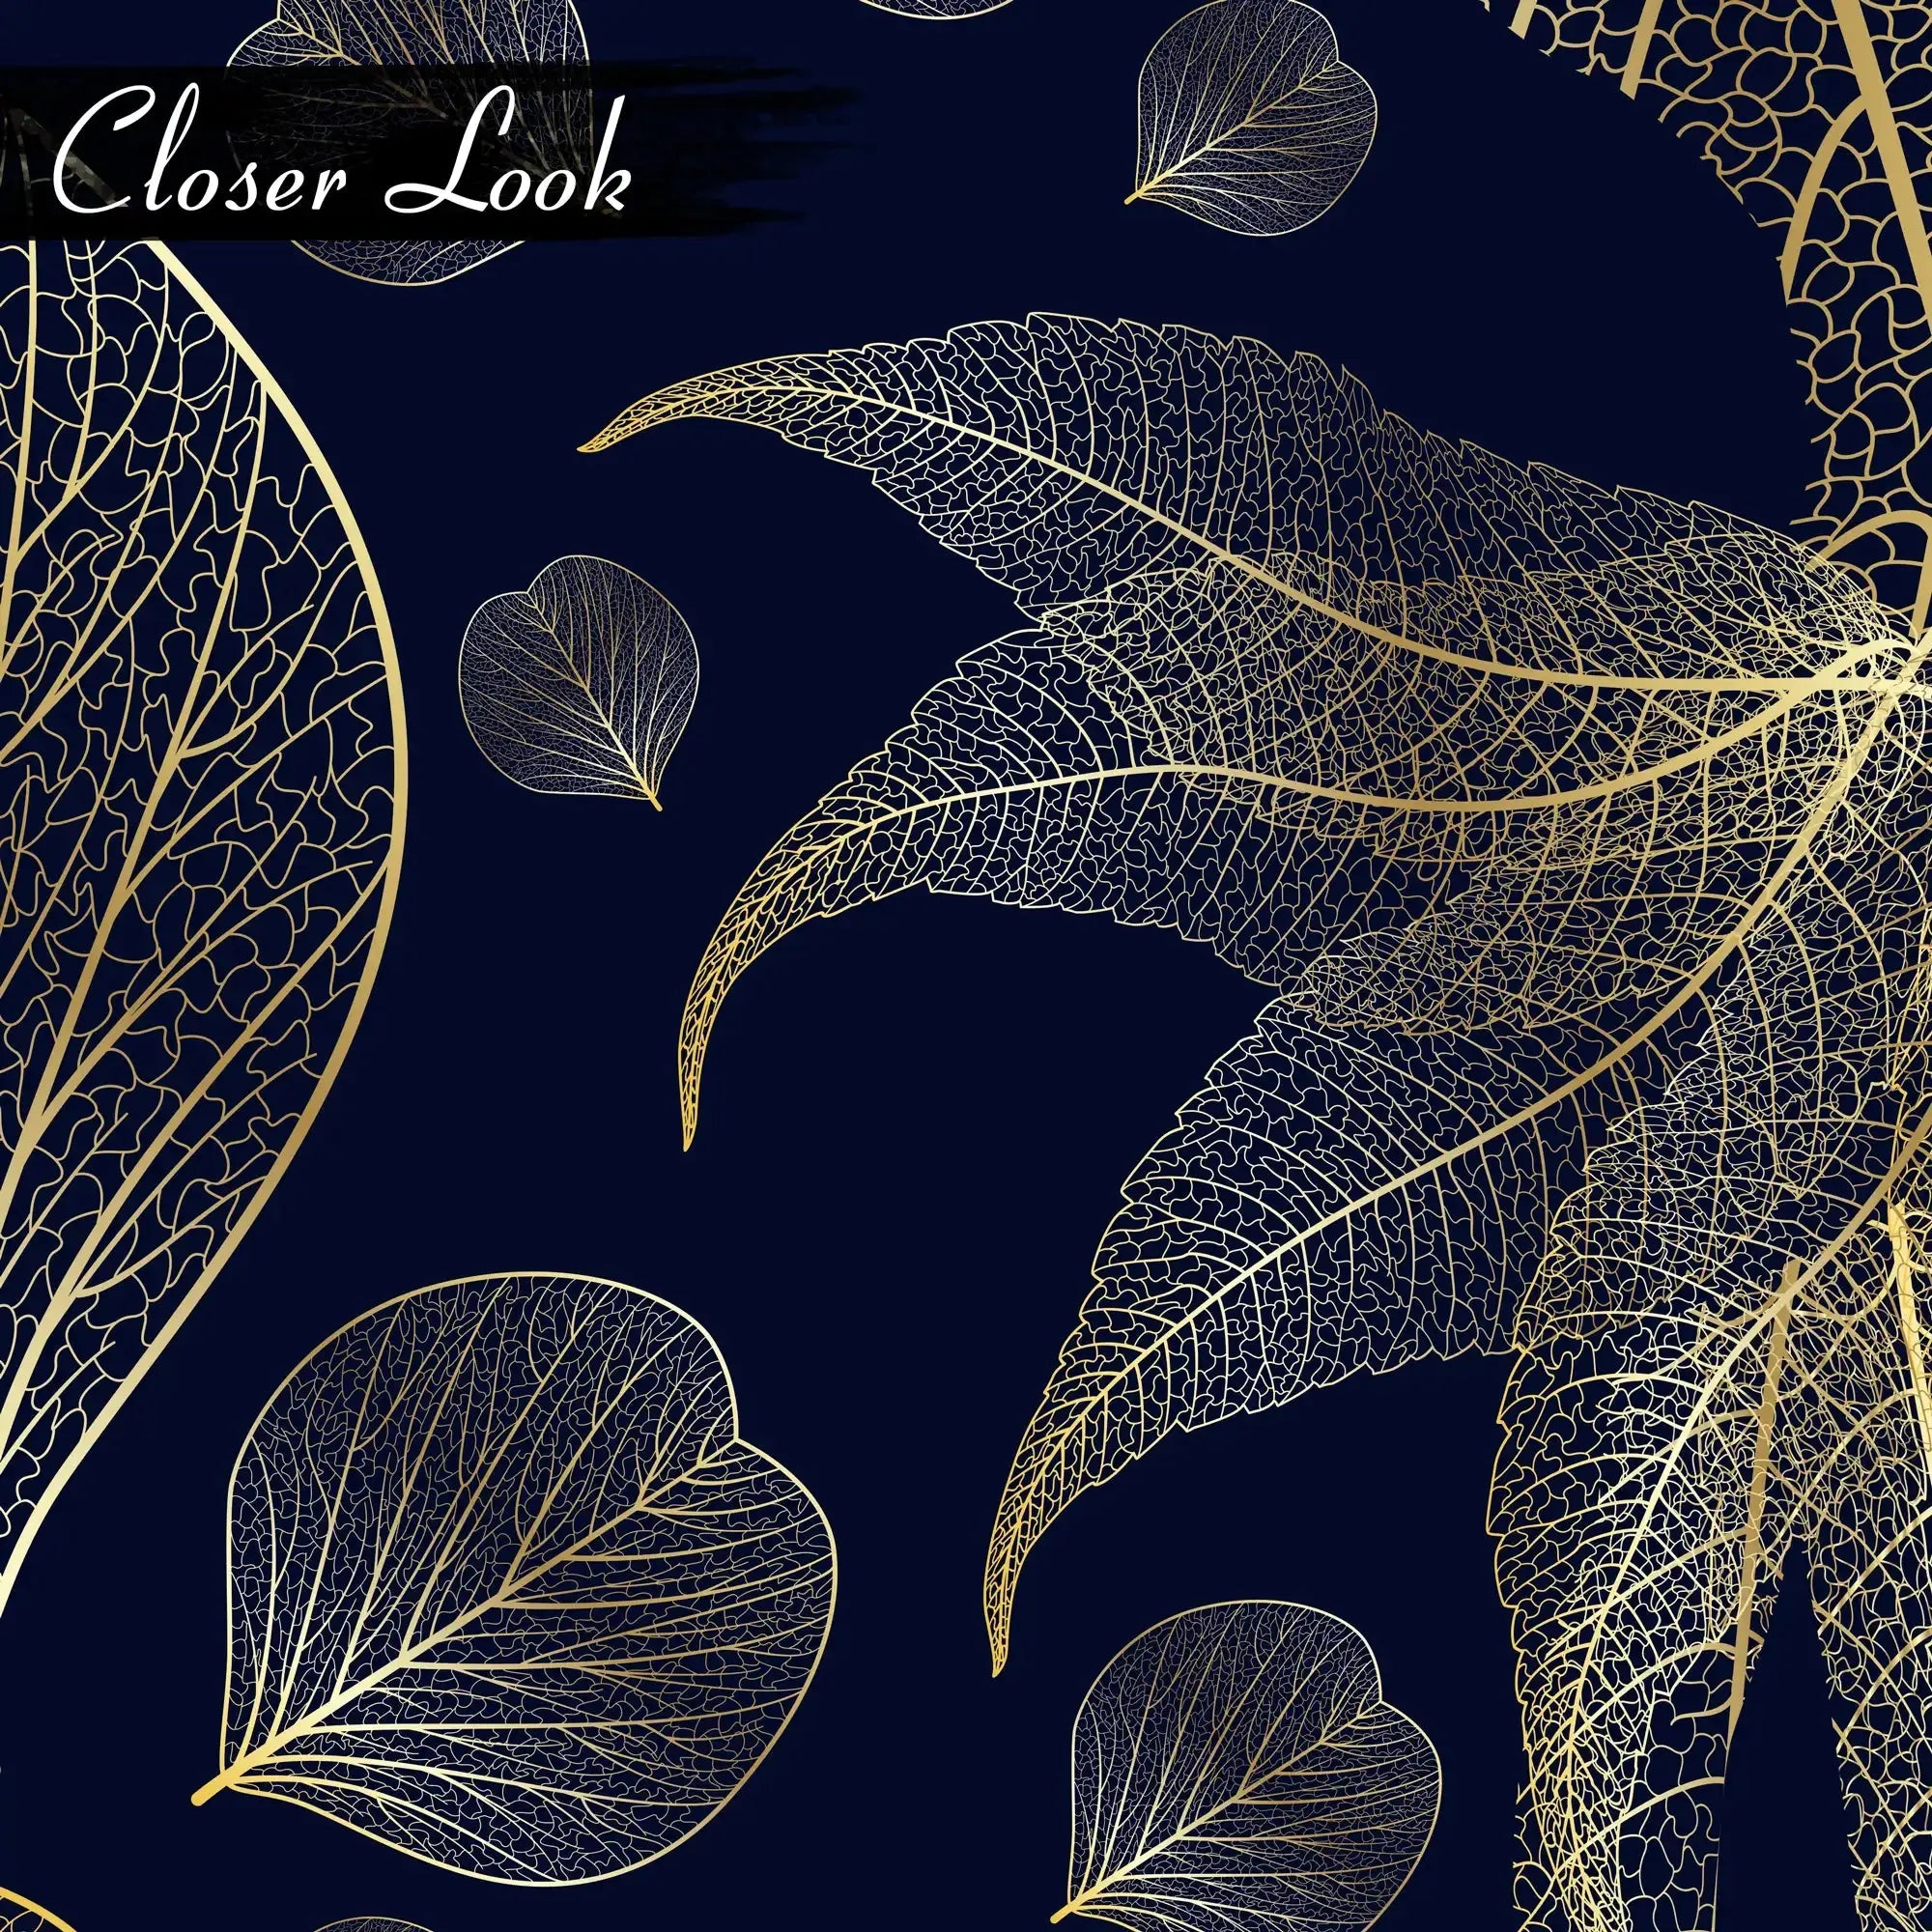 3108-A / Modern Floral Wallpaper: Gold Leaves and Flowing Patterns, Adhesive Peel and Stick for Stylish Wall Decor - Artevella